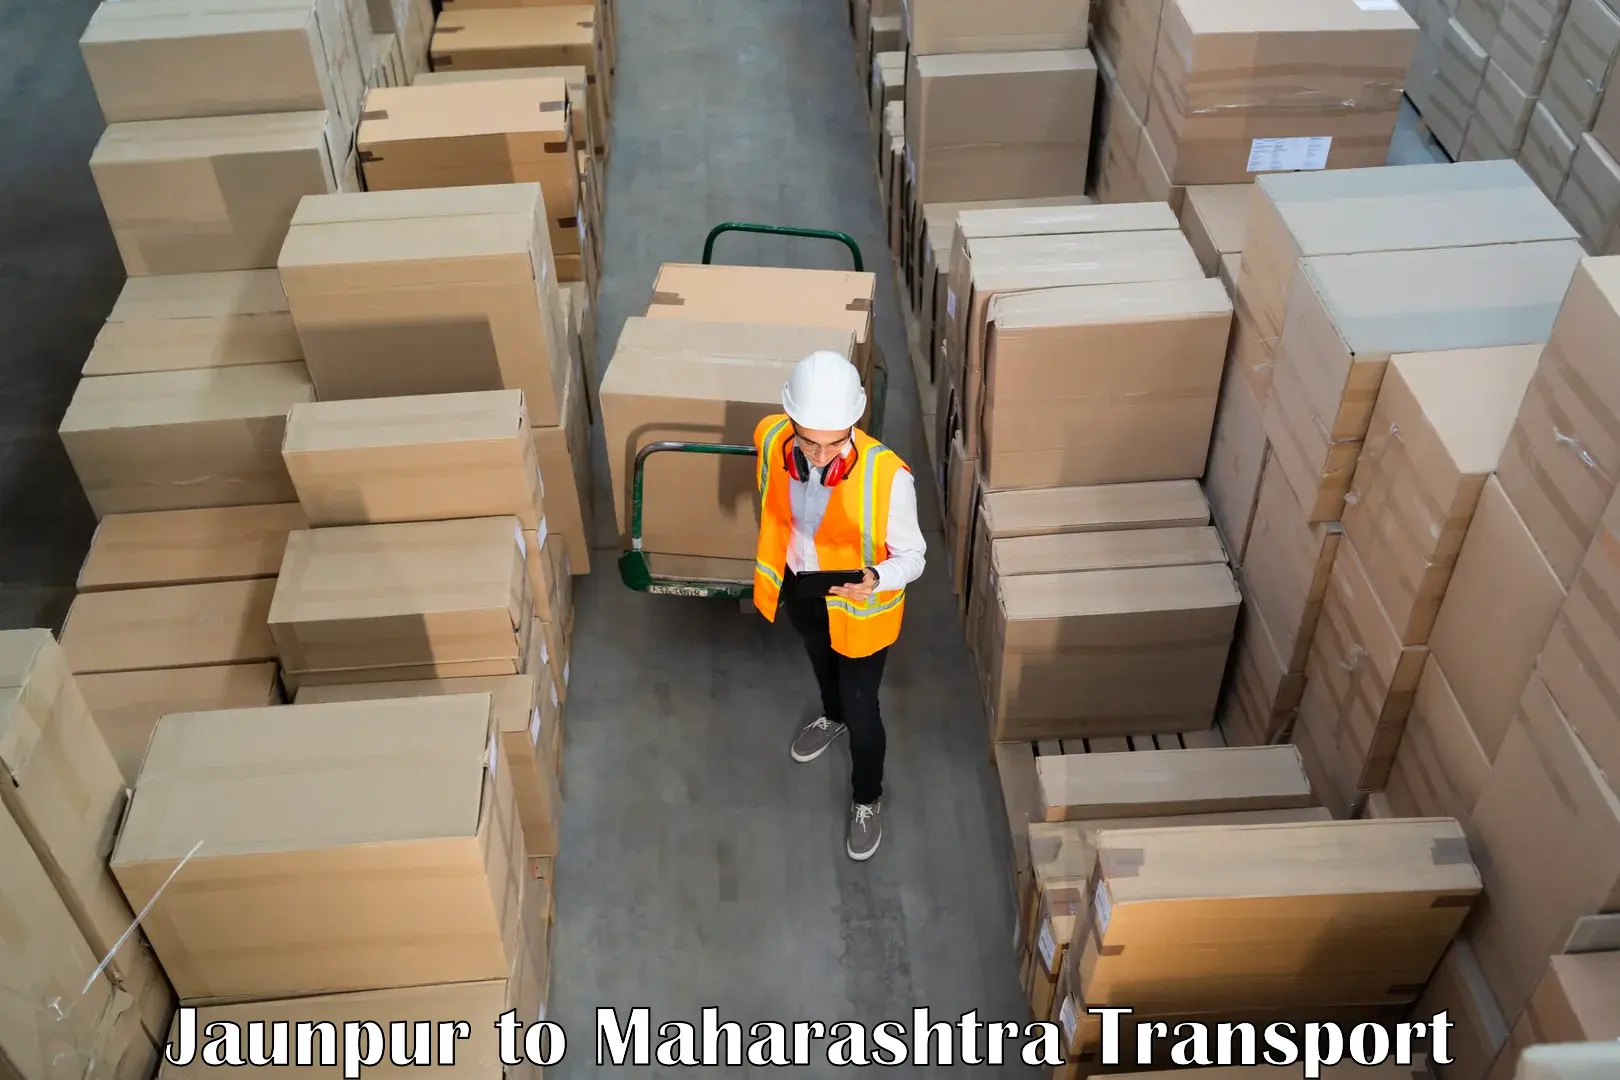 Truck transport companies in India Jaunpur to Saphale